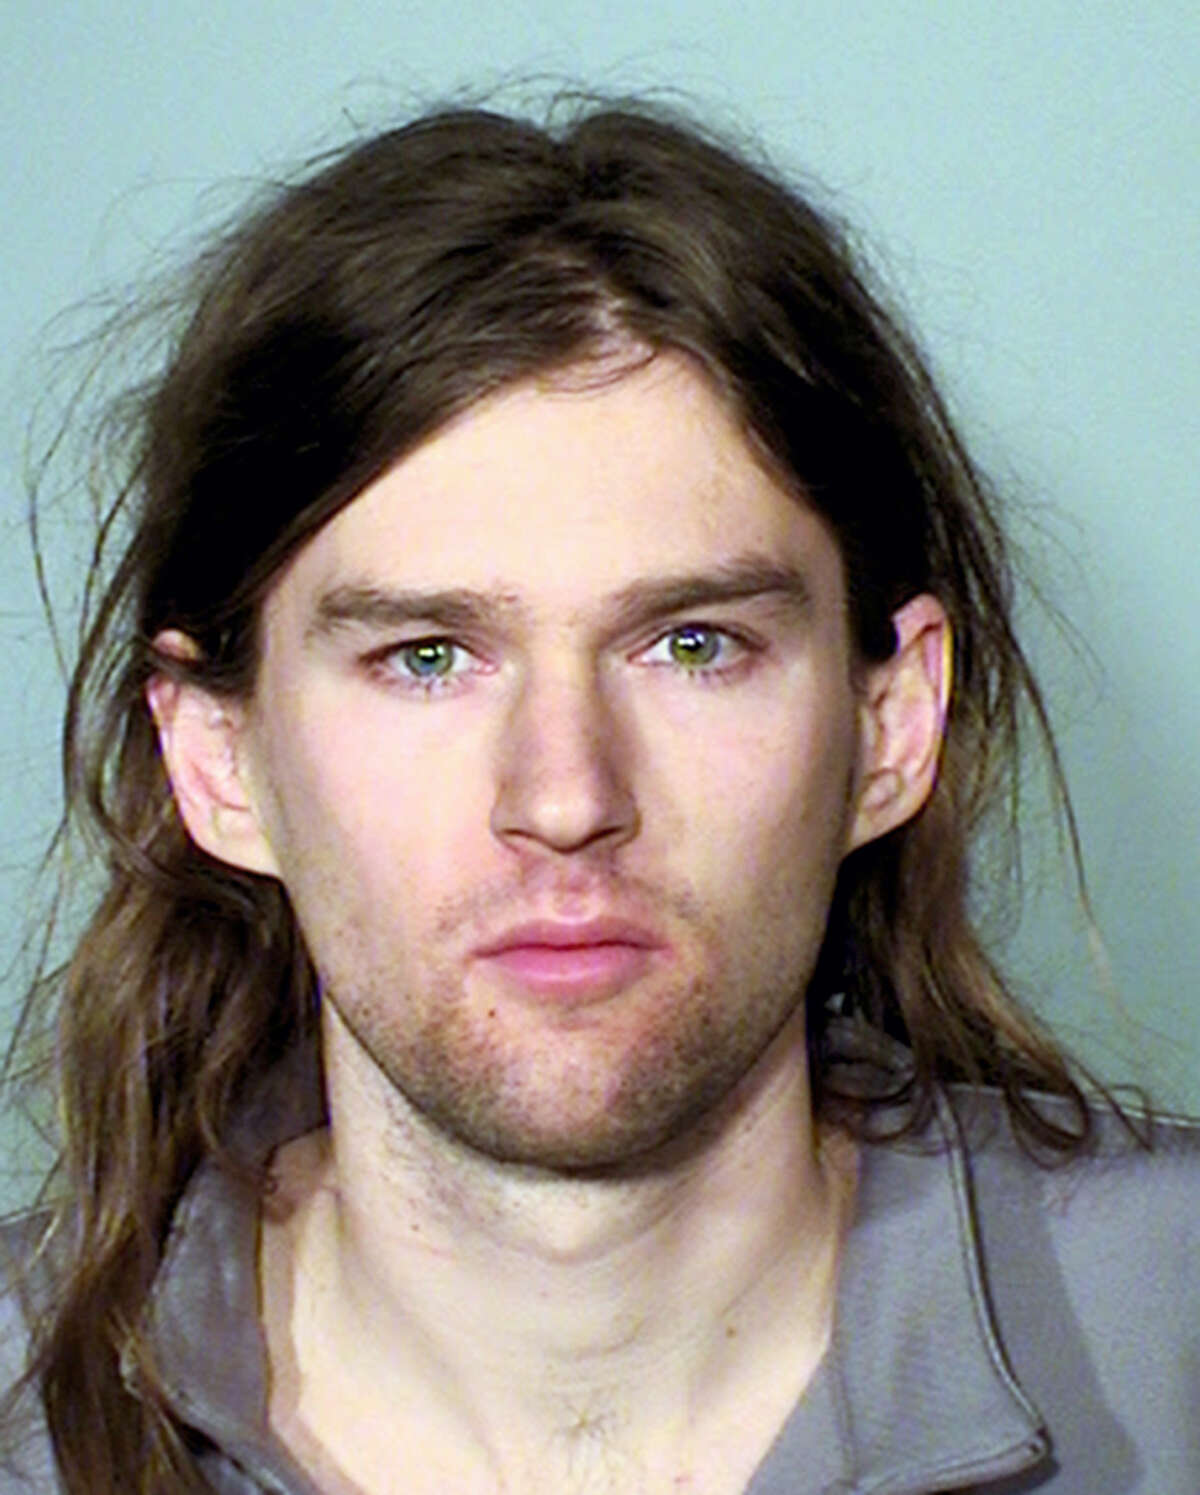 This undated file photo provided by the Ramsey County Sheriff’s Office in St. Paul, Minn., shows Linwood Kaine. U.S. Sen. Tim Kaine’s youngest son was among eight people charged for allegedly disrupting a March 2017 rally in support of President Donald Trump. Linwood “Woody” Kaine, of Minneapolis, was charged Friday, May 26, 2017, with one gross misdemeanor count of obstructing the legal process and misdemeanor counts of fleeing on foot and concealing his identity in public.